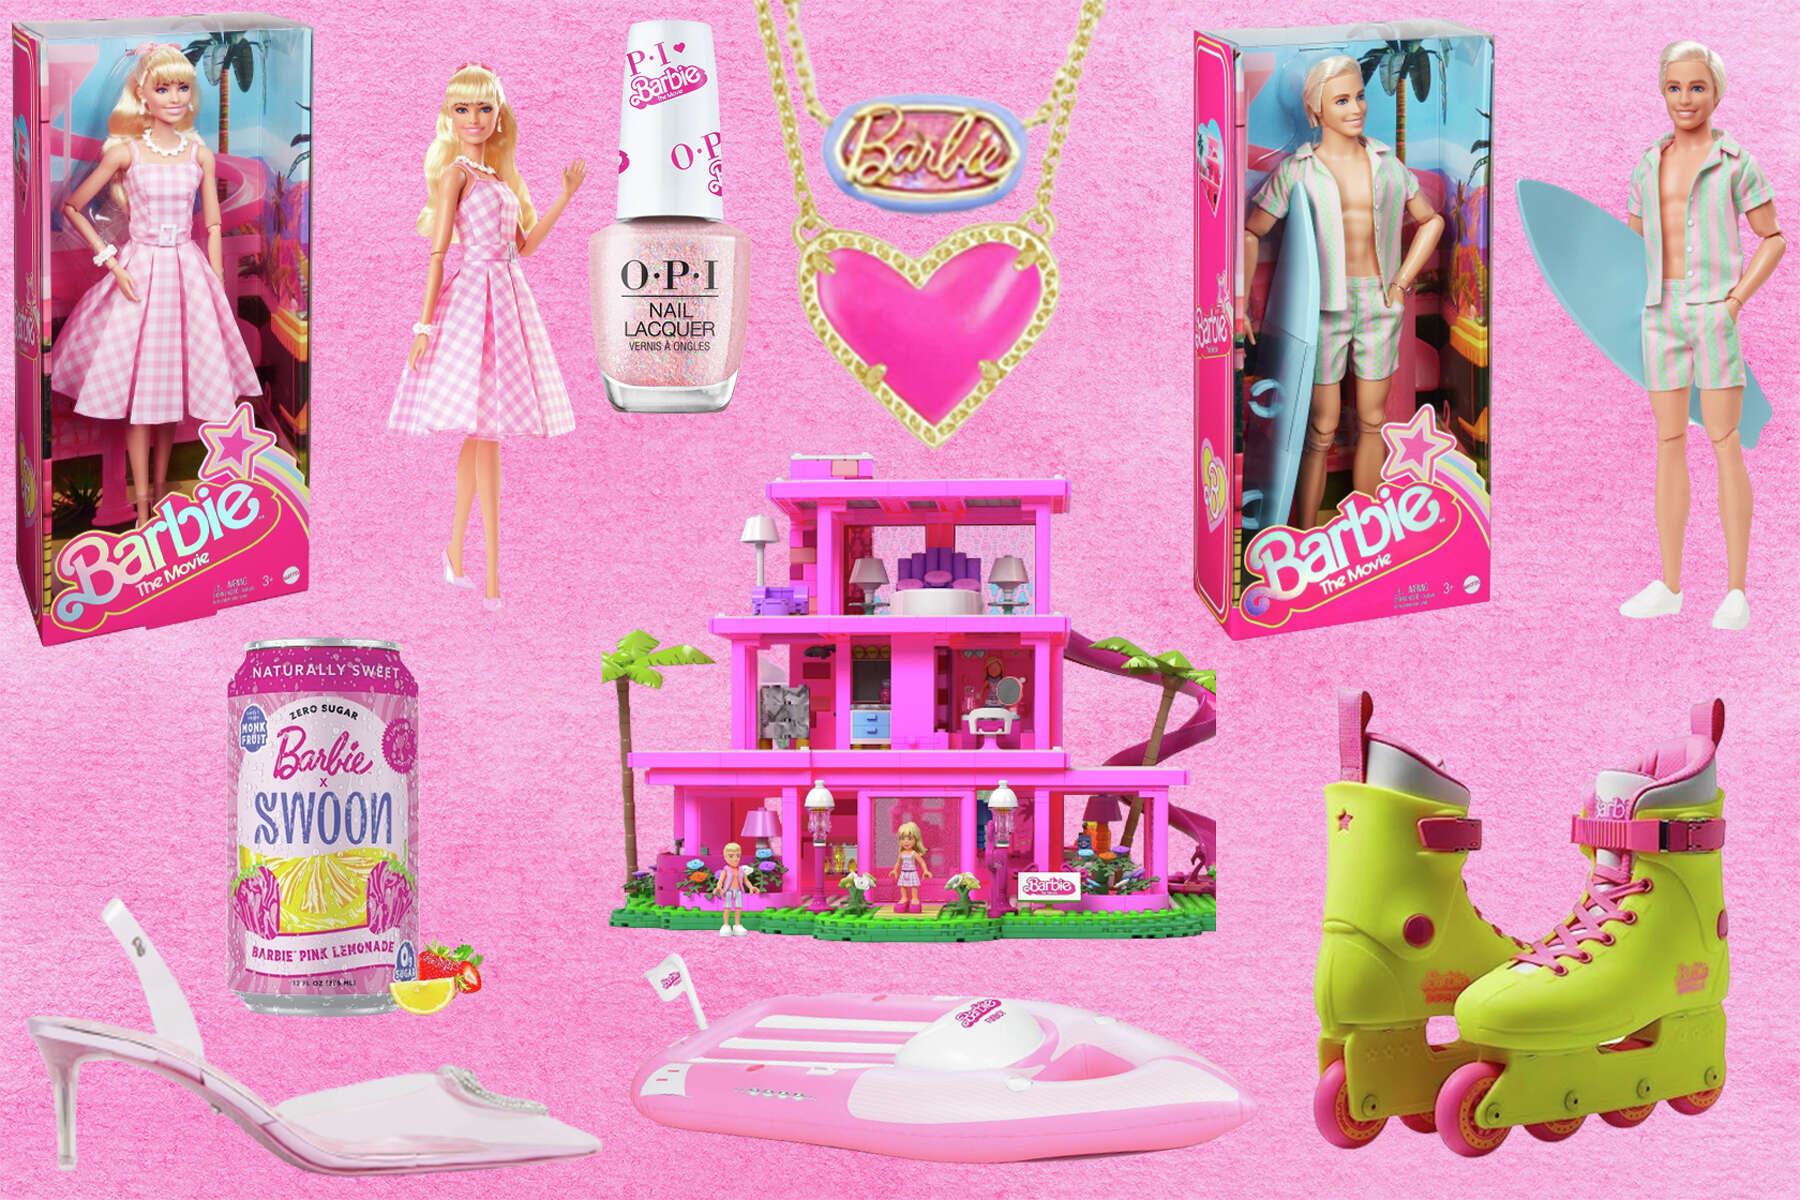 Best 'Barbie' Movie Gifts 2023: Barbie Movie Merch and Collabs